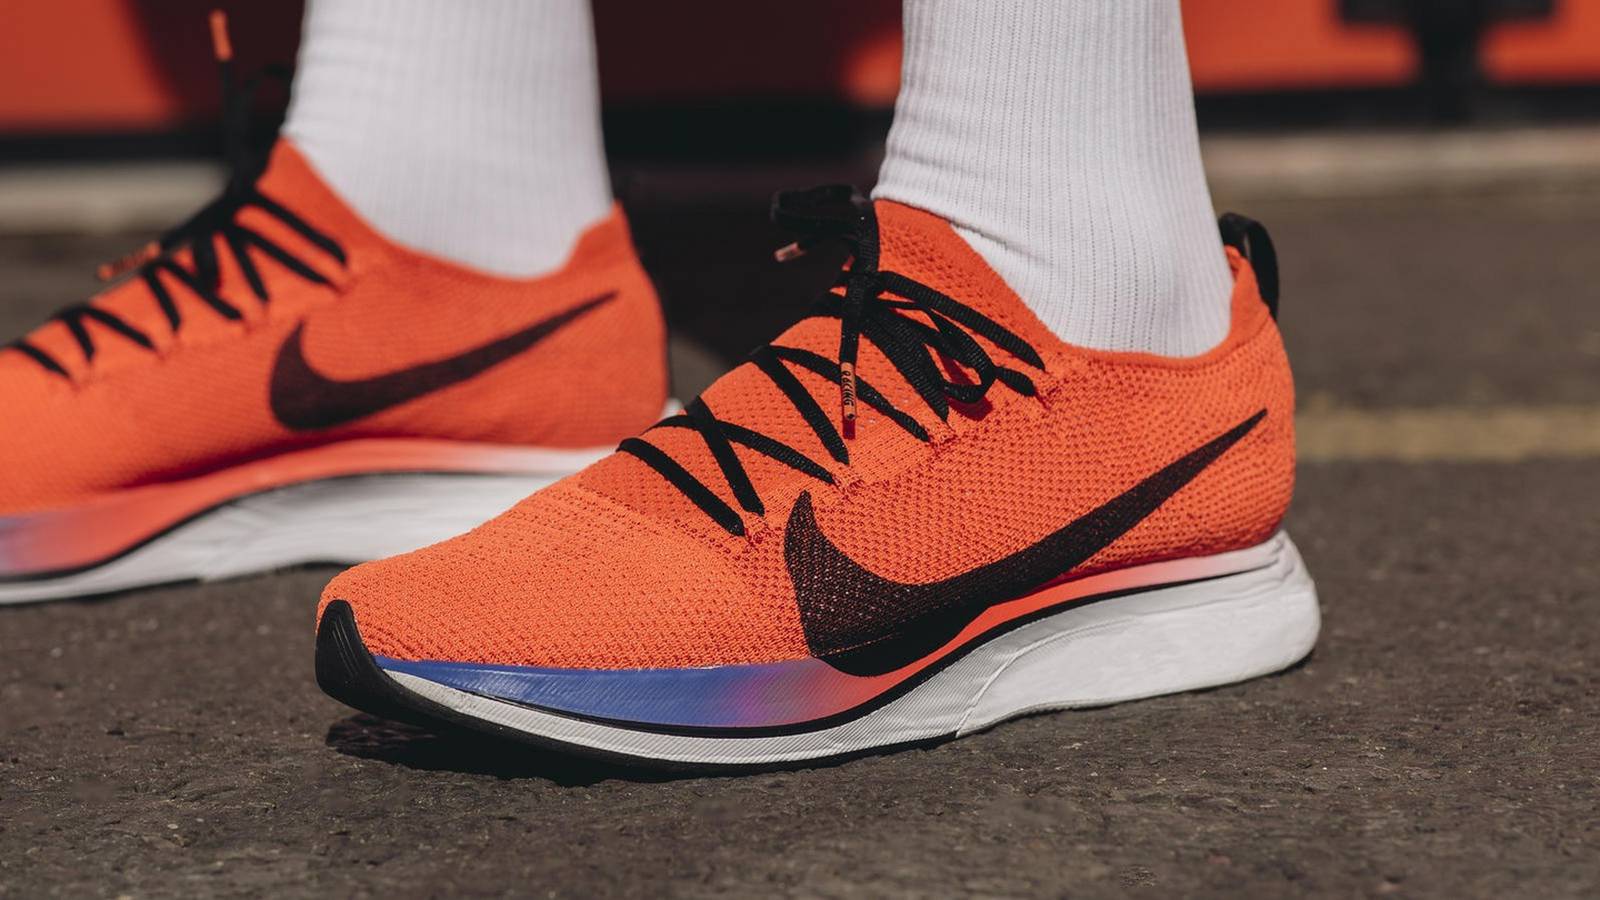 Will Vaporfly help me run faster, and are they worth the cost? The Irish Times